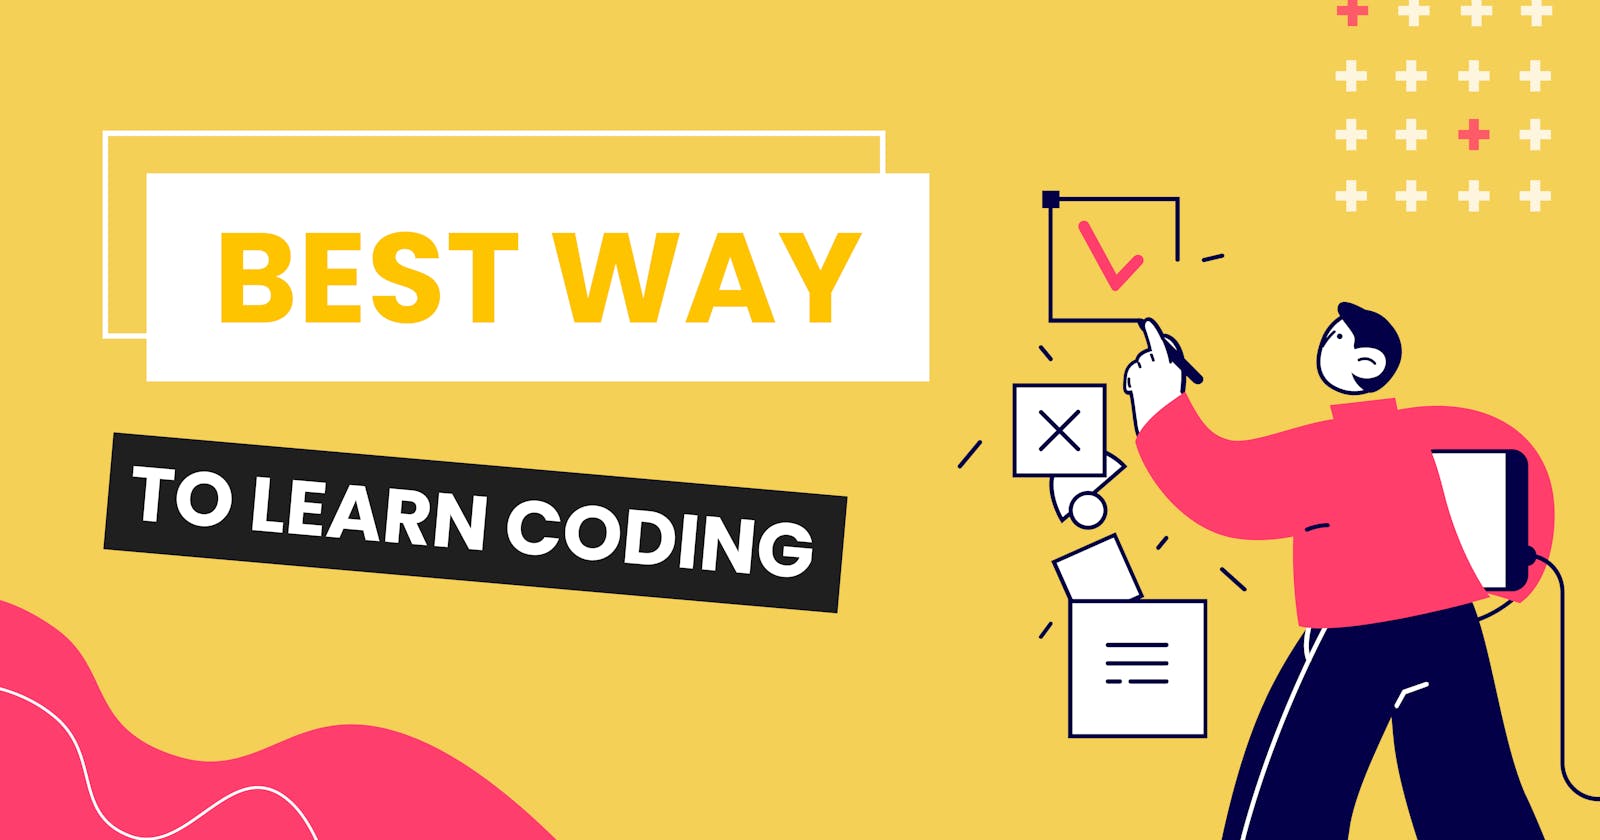 Best Way to Learn Coding | Self-Taught Learning Tips